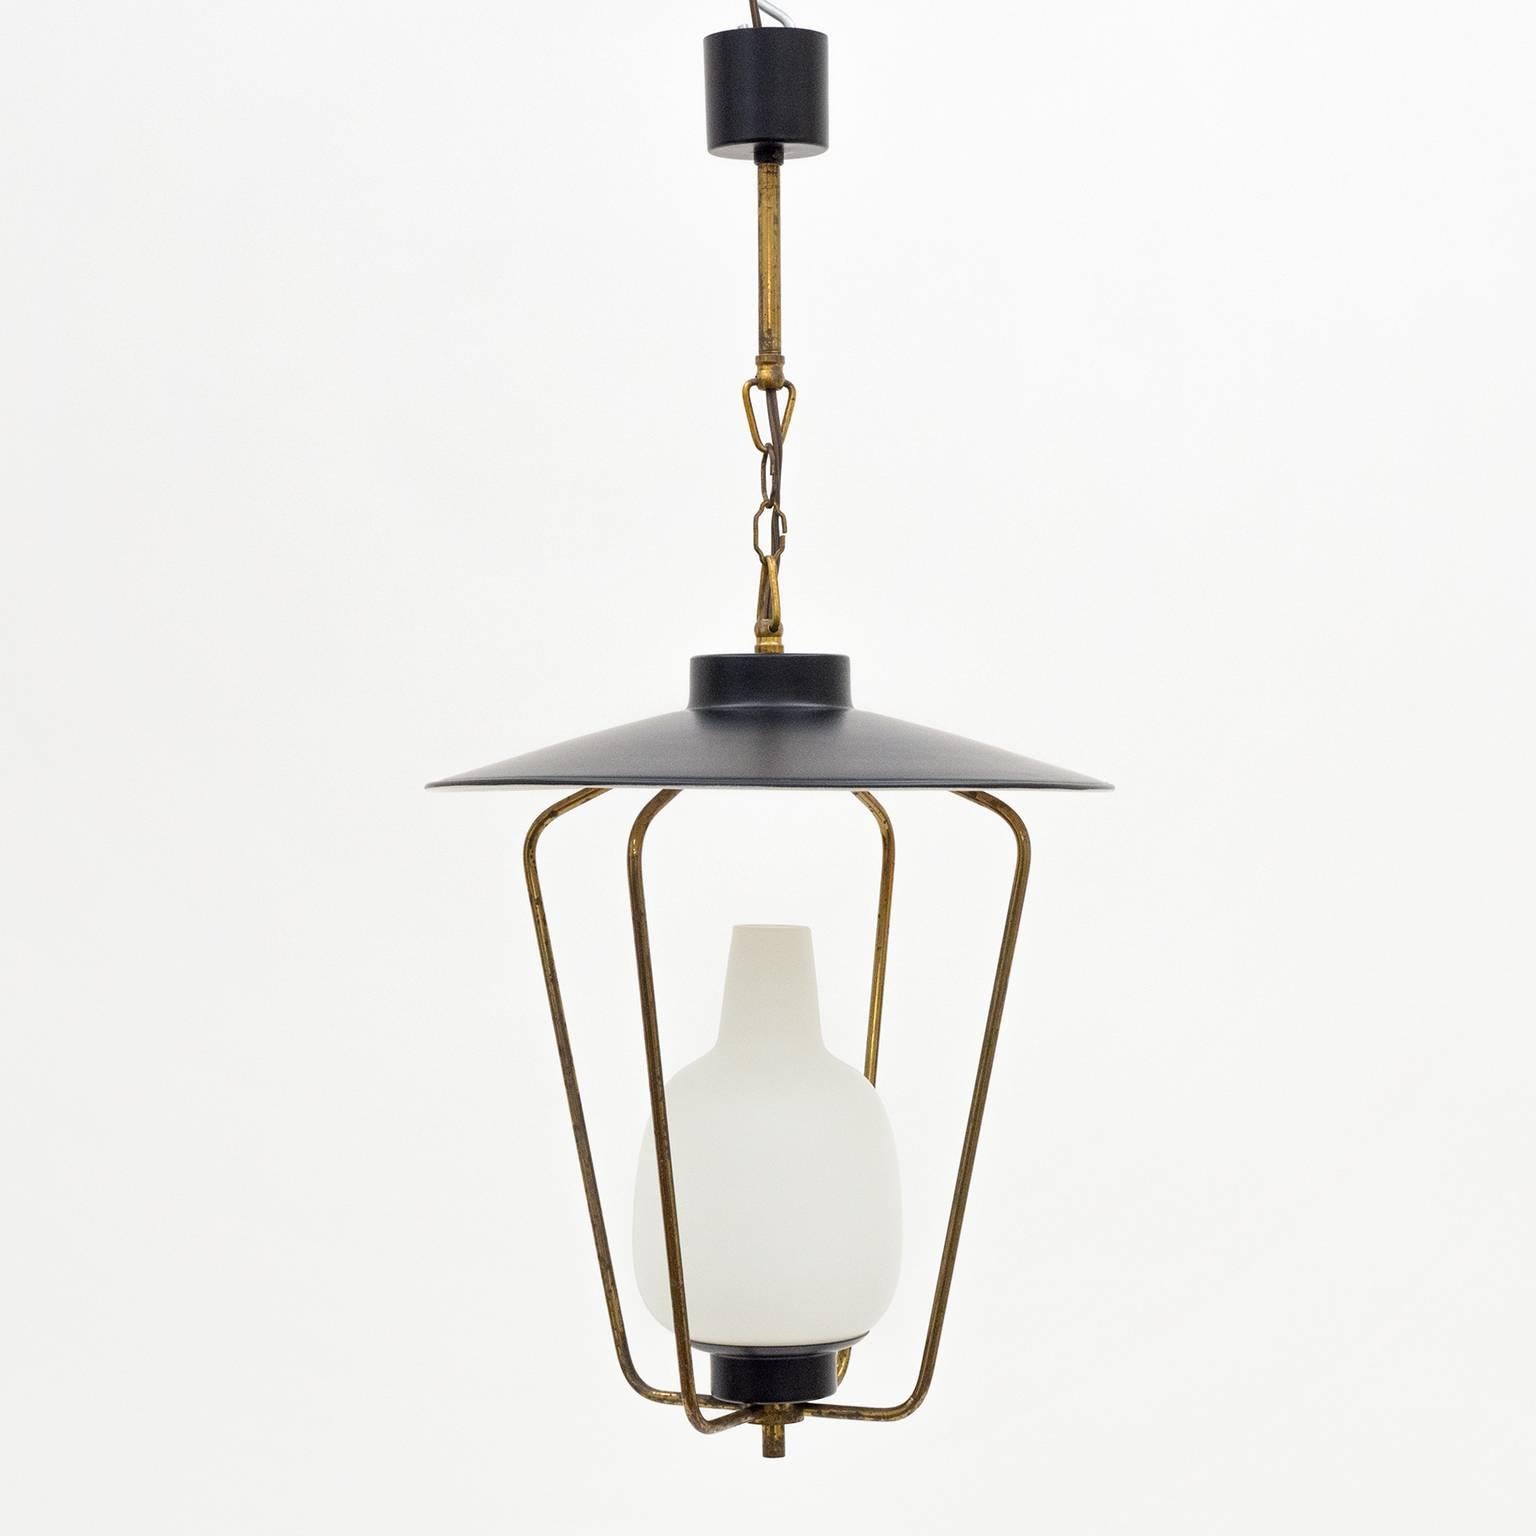 Charming modernist lantern pendant attributed to Stilnovo, 1950s. Satinated 'triplex opal' glass, brass (with patina) and lacquered aluminum. One original brass E14 socket with new wiring.